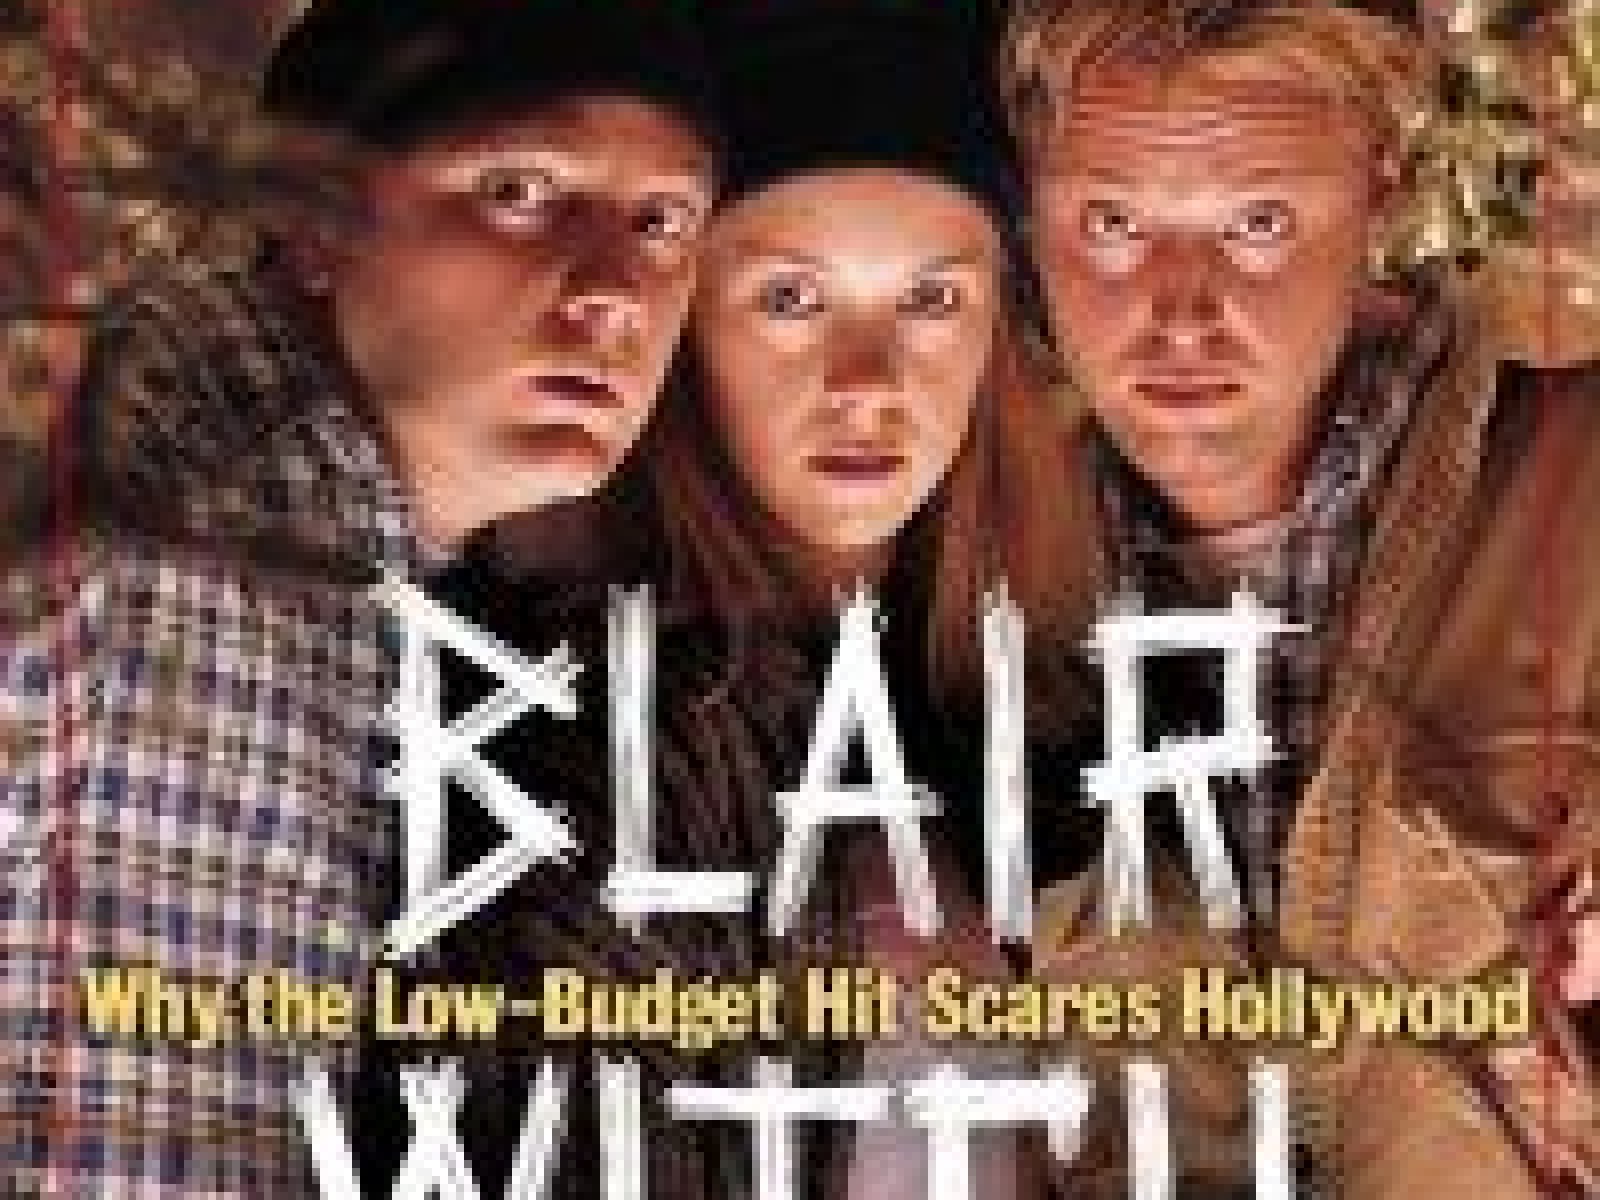 The Blair Witch Cult